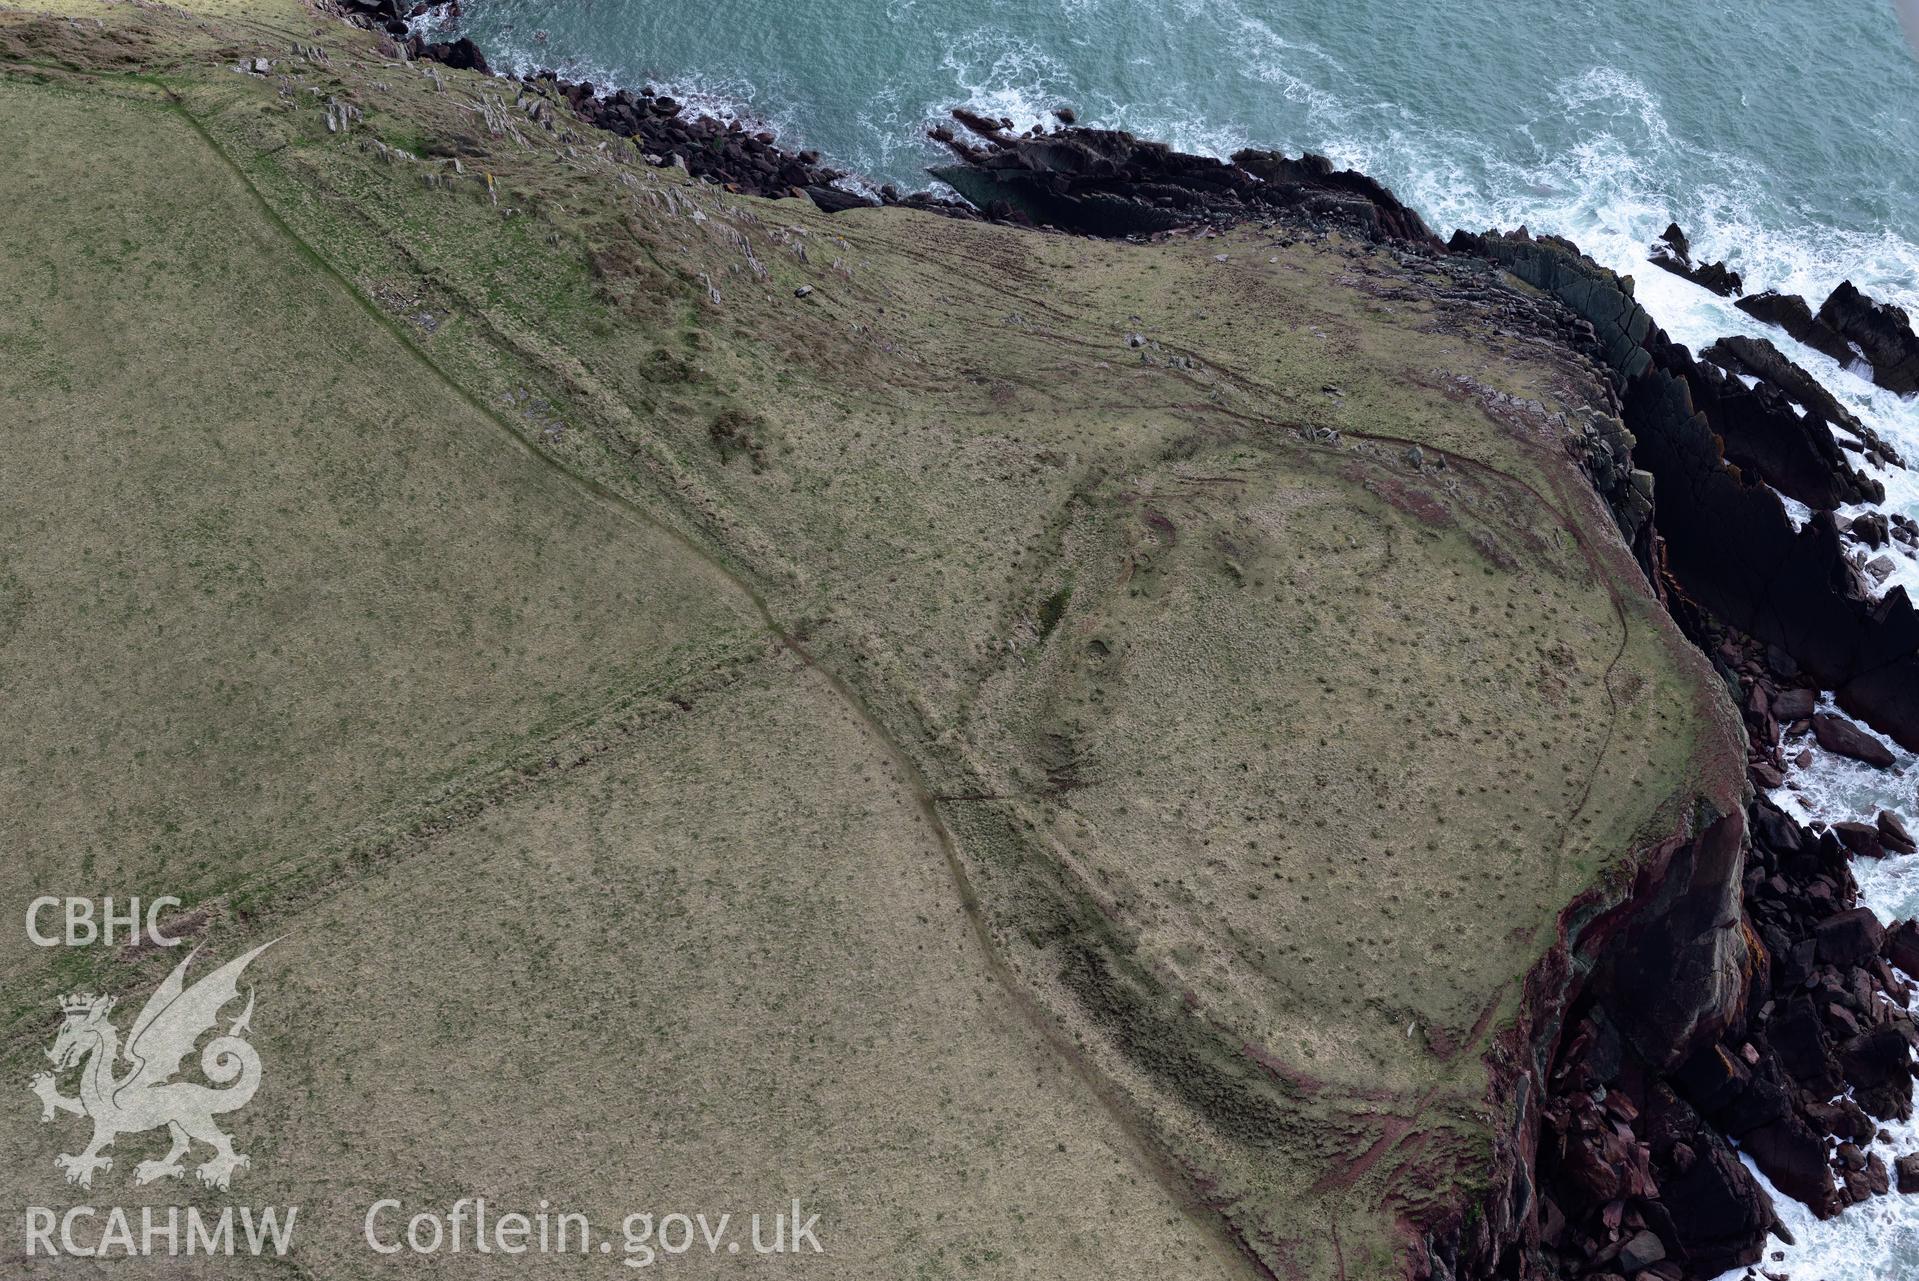 West Pickard Camp. Baseline aerial reconnaissance survey for the CHERISH Project. ? Crown: CHERISH PROJECT 2018. Produced with EU funds through the Ireland Wales Co-operation Programme 2014-2020. All material made freely available through the Open Government Licence.